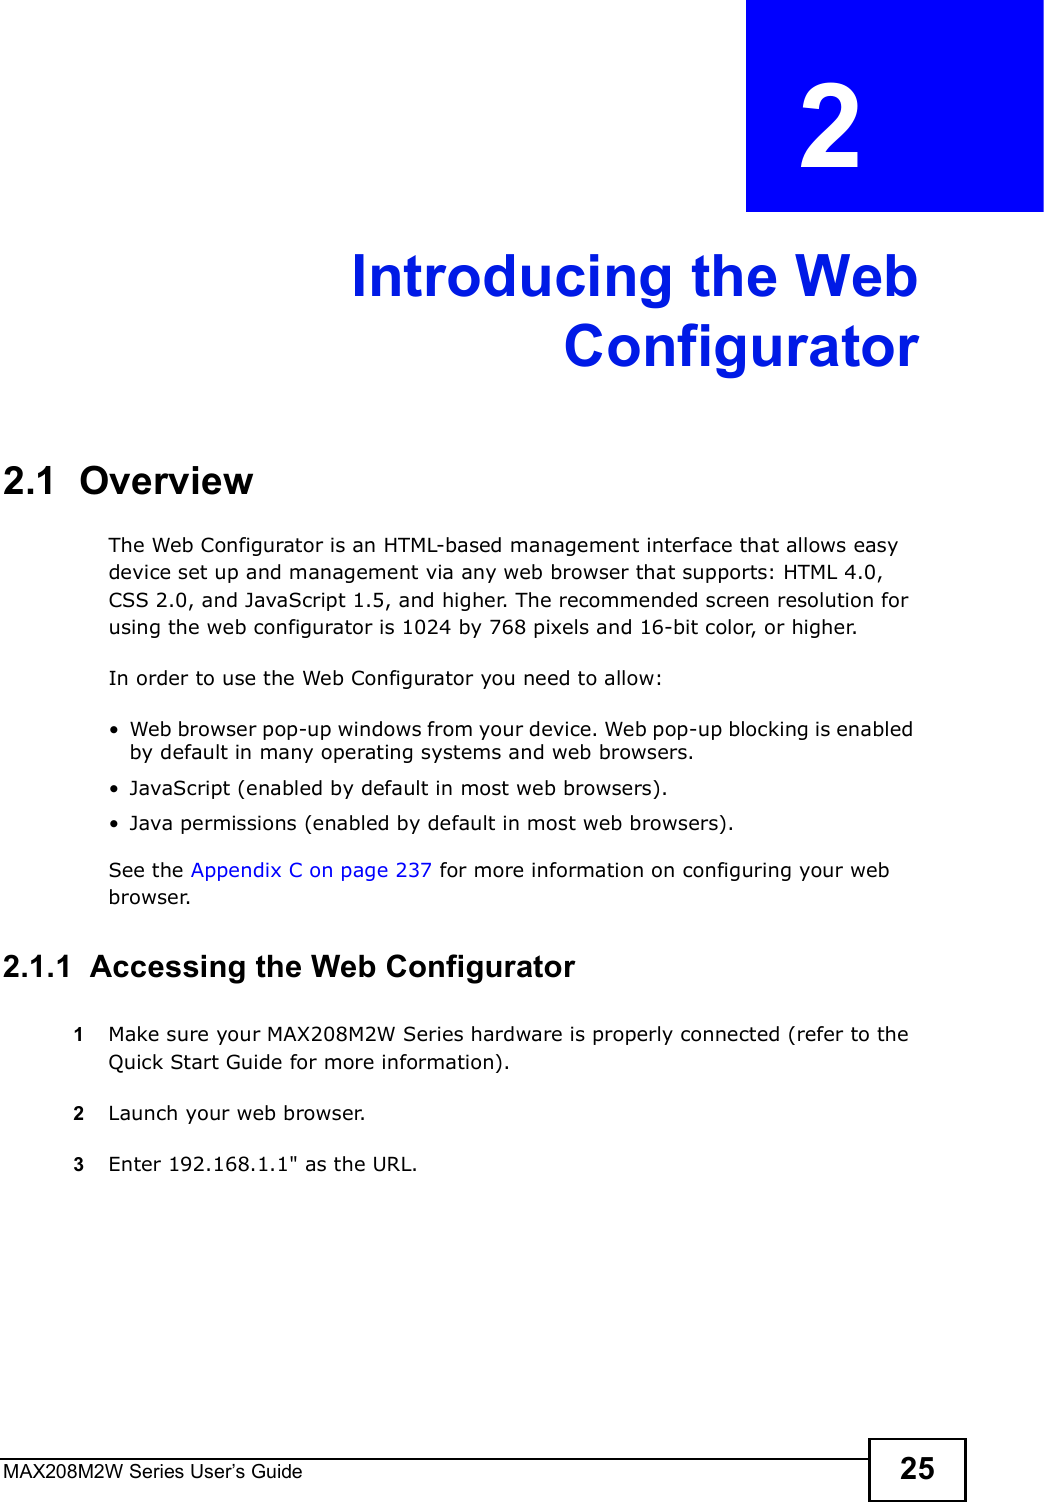 MAX208M2W Series User s Guide 25CHAPTER  2 Introducing the WebConfigurator2.1  OverviewThe Web Configurator is an HTML-based management interface that allows easy device set up and management via any web browser that supports: HTML 4.0, CSS 2.0, and JavaScript 1.5, and higher. The recommended screen resolution for using the web configurator is 1024 by 768 pixels and 16-bit color, or higher.In order to use the Web Configurator you need to allow:!Web browser pop-up windows from your device. Web pop-up blocking is enabled by default in many operating systems and web browsers.!JavaScript (enabled by default in most web browsers).!Java permissions (enabled by default in most web browsers).See the Appendix C on page 237 for more information on configuring your web browser.2.1.1  Accessing the Web Configurator1Make sure your MAX208M2W Series hardware is properly connected (refer to the Quick Start Guide for more information).2Launch your web browser.3Enter 192.168.1.1&quot; as the URL.